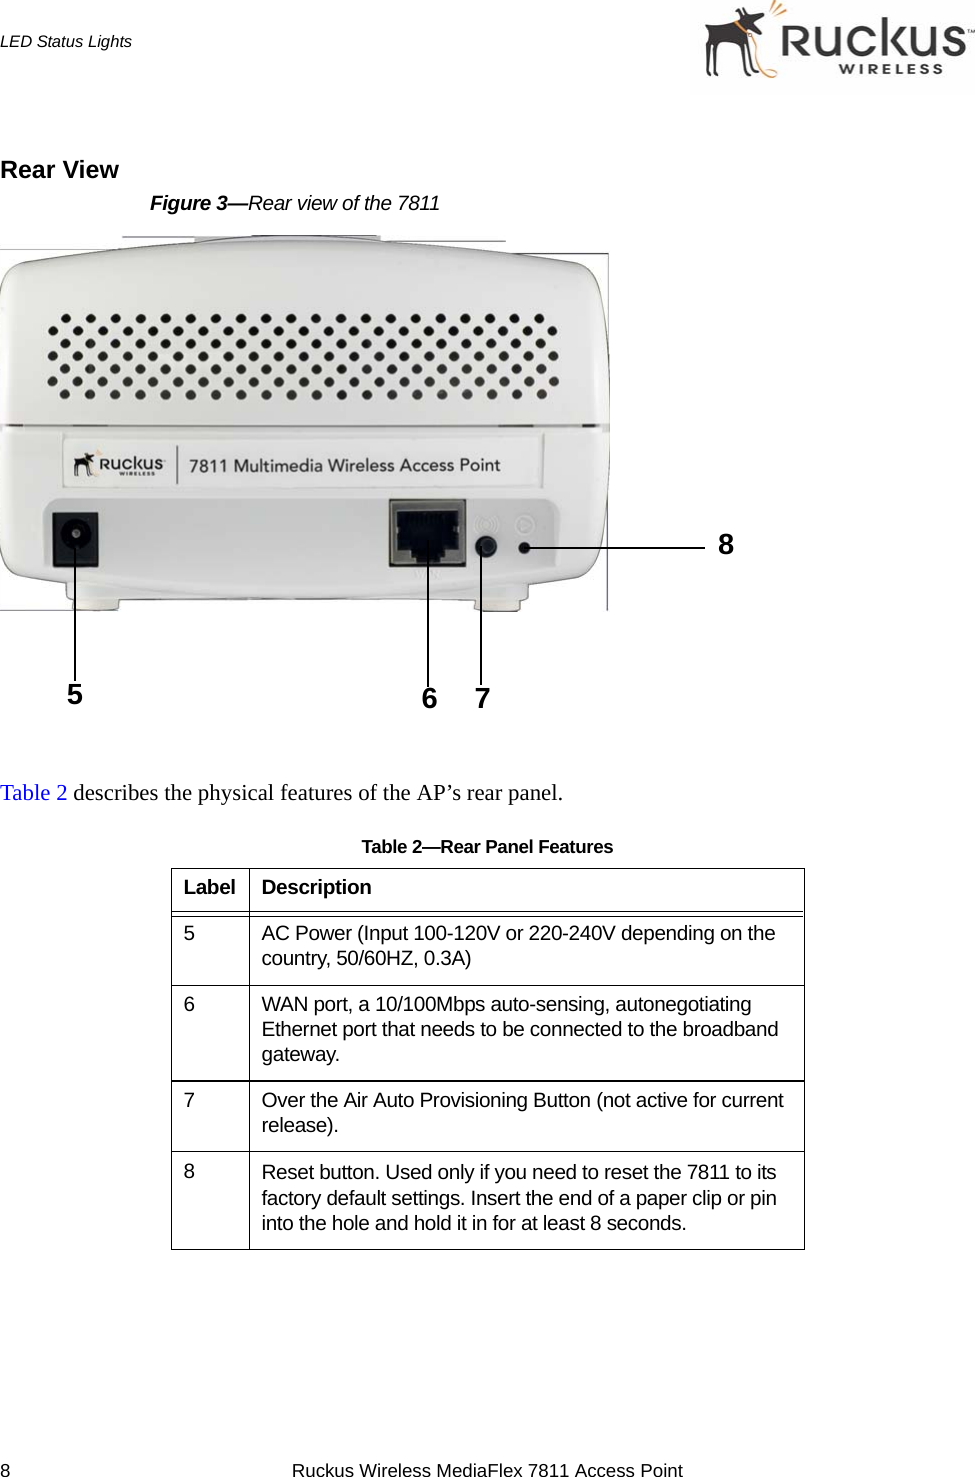 8 Ruckus Wireless MediaFlex 7811 Access PointLED Status LightsRear ViewFigure 3—Rear view of the 7811Table 2 describes the physical features of the AP’s rear panel.Table 2—Rear Panel FeaturesLabel Description5 AC Power (Input 100-120V or 220-240V depending on the country, 50/60HZ, 0.3A)6 WAN port, a 10/100Mbps auto-sensing, autonegotiating Ethernet port that needs to be connected to the broadband gateway.7 Over the Air Auto Provisioning Button (not active for current release).8Reset button. Used only if you need to reset the 7811 to its factory default settings. Insert the end of a paper clip or pin into the hole and hold it in for at least 8 seconds.5678